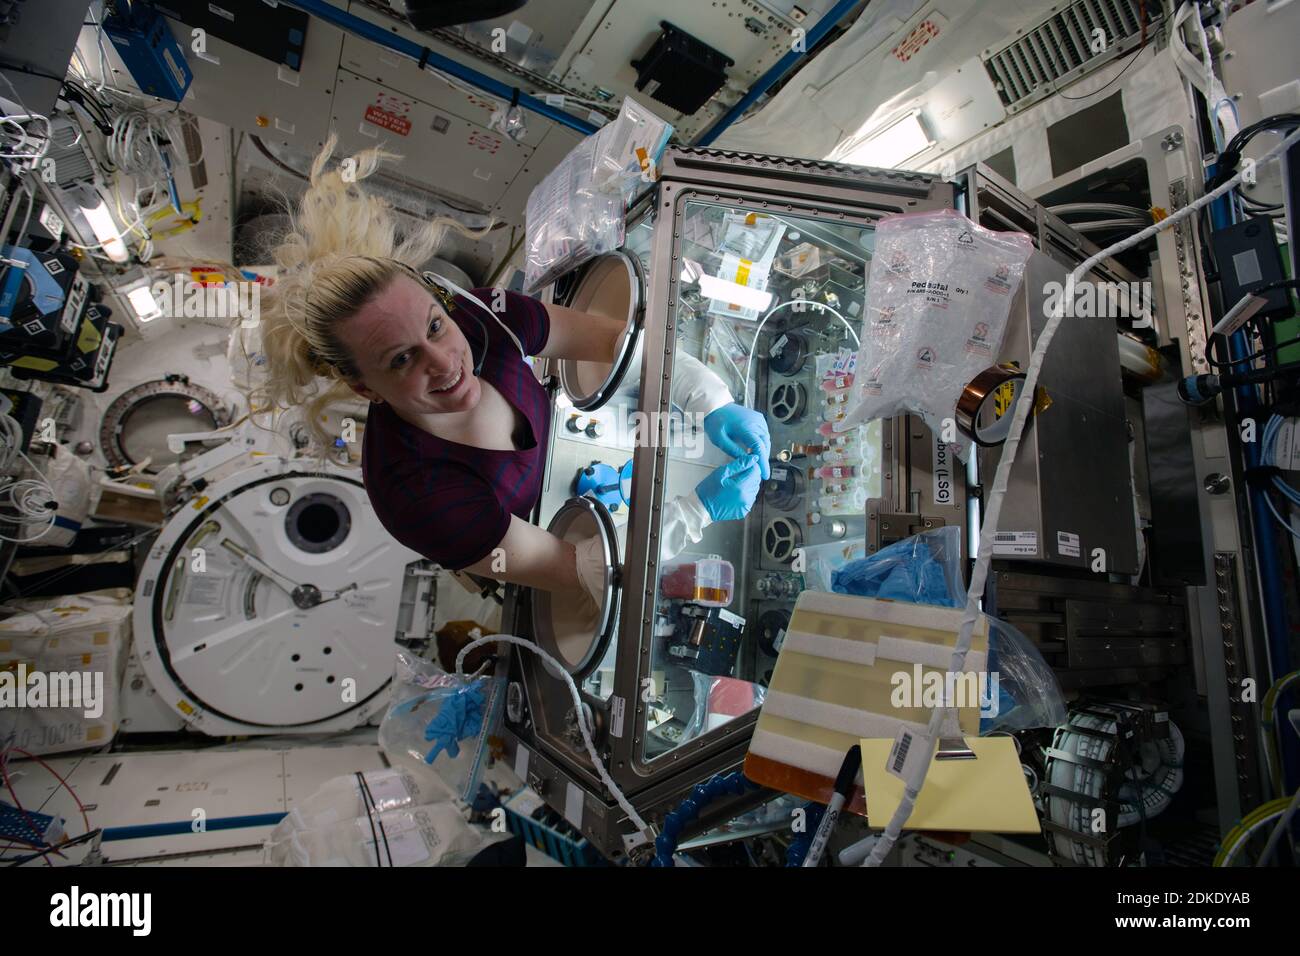 ISS - 09 December 2020 - NASA astronaut and Expedition 64 Flight Engineer Kate Rubins works inside the Life Sciences Glovebox conducting research for Stock Photo